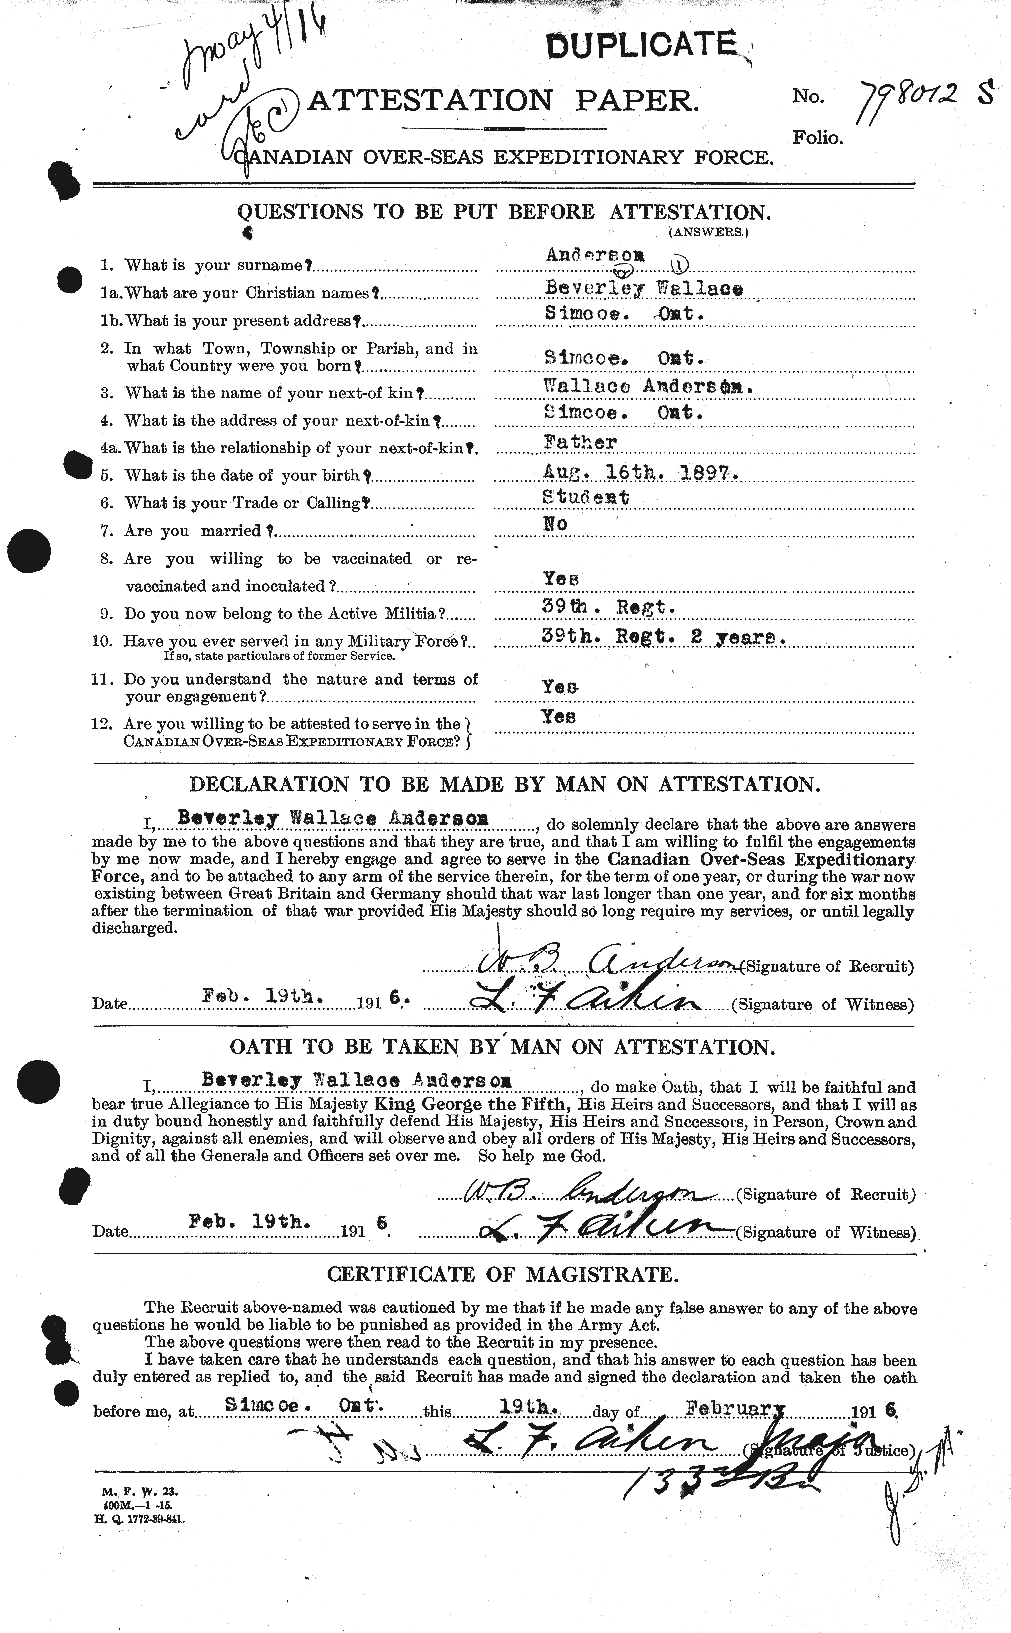 Personnel Records of the First World War - CEF 209310a